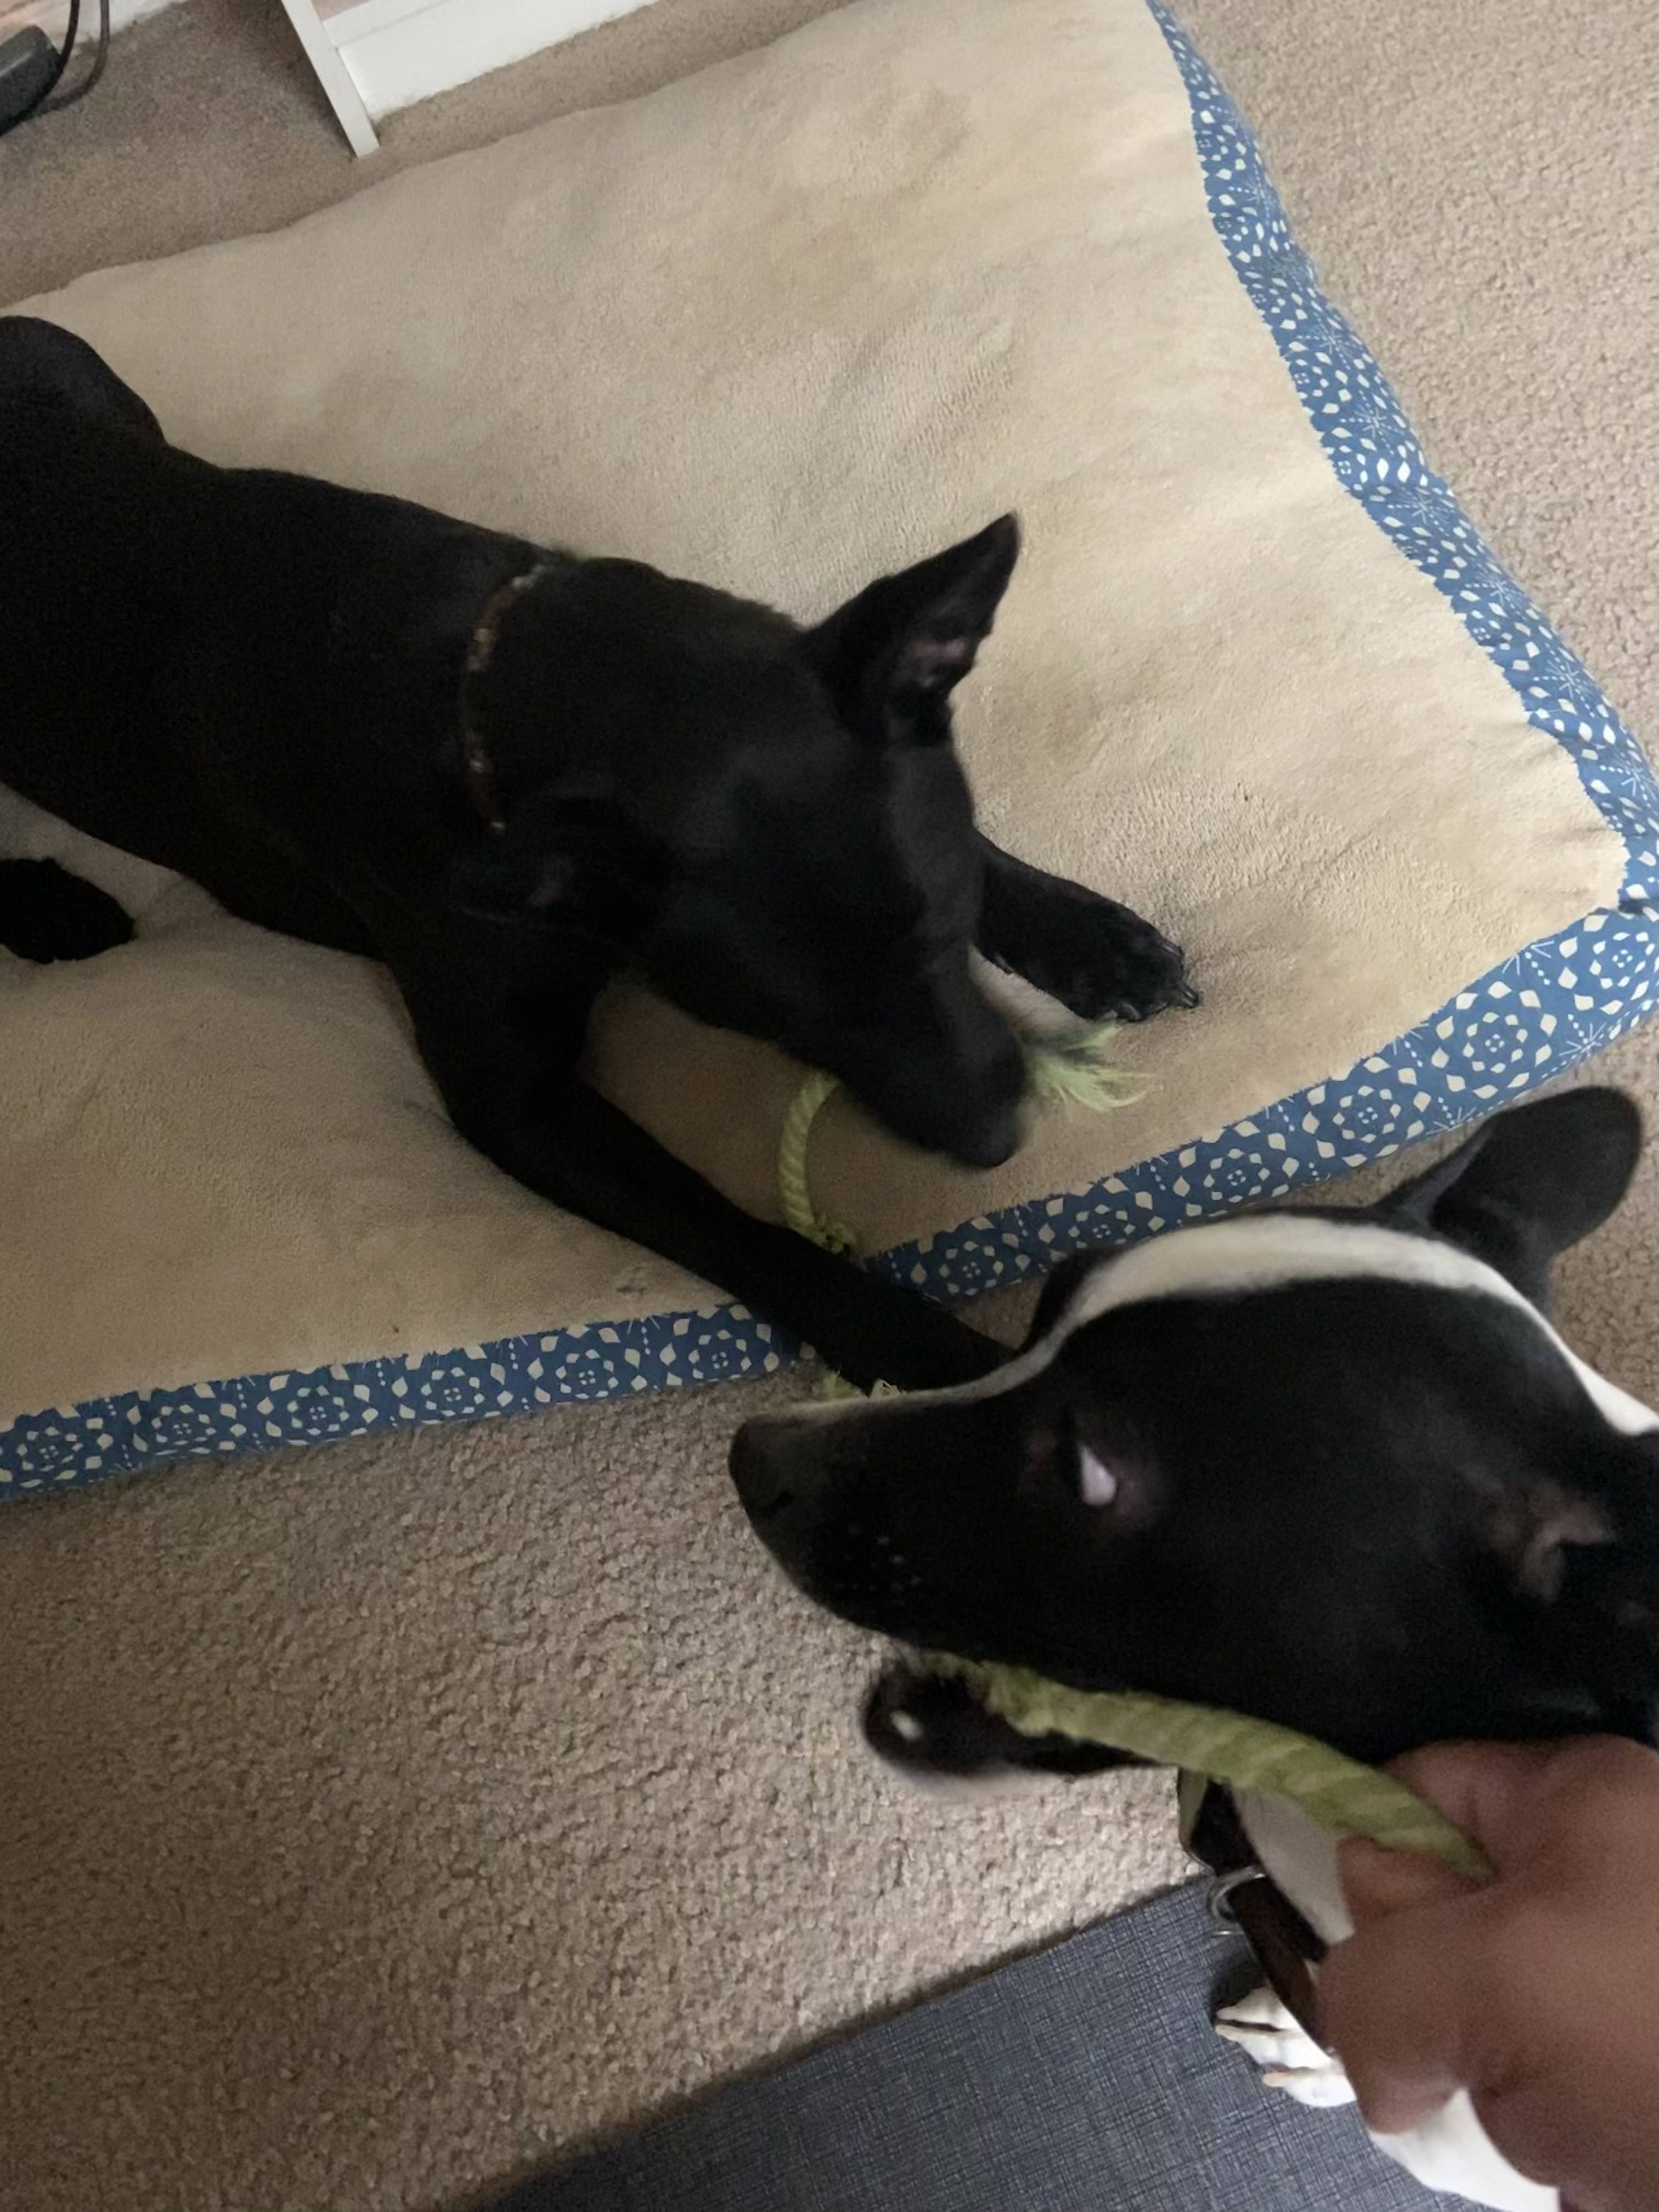 Two dogs playing tug, with a human hand pulling the rope.